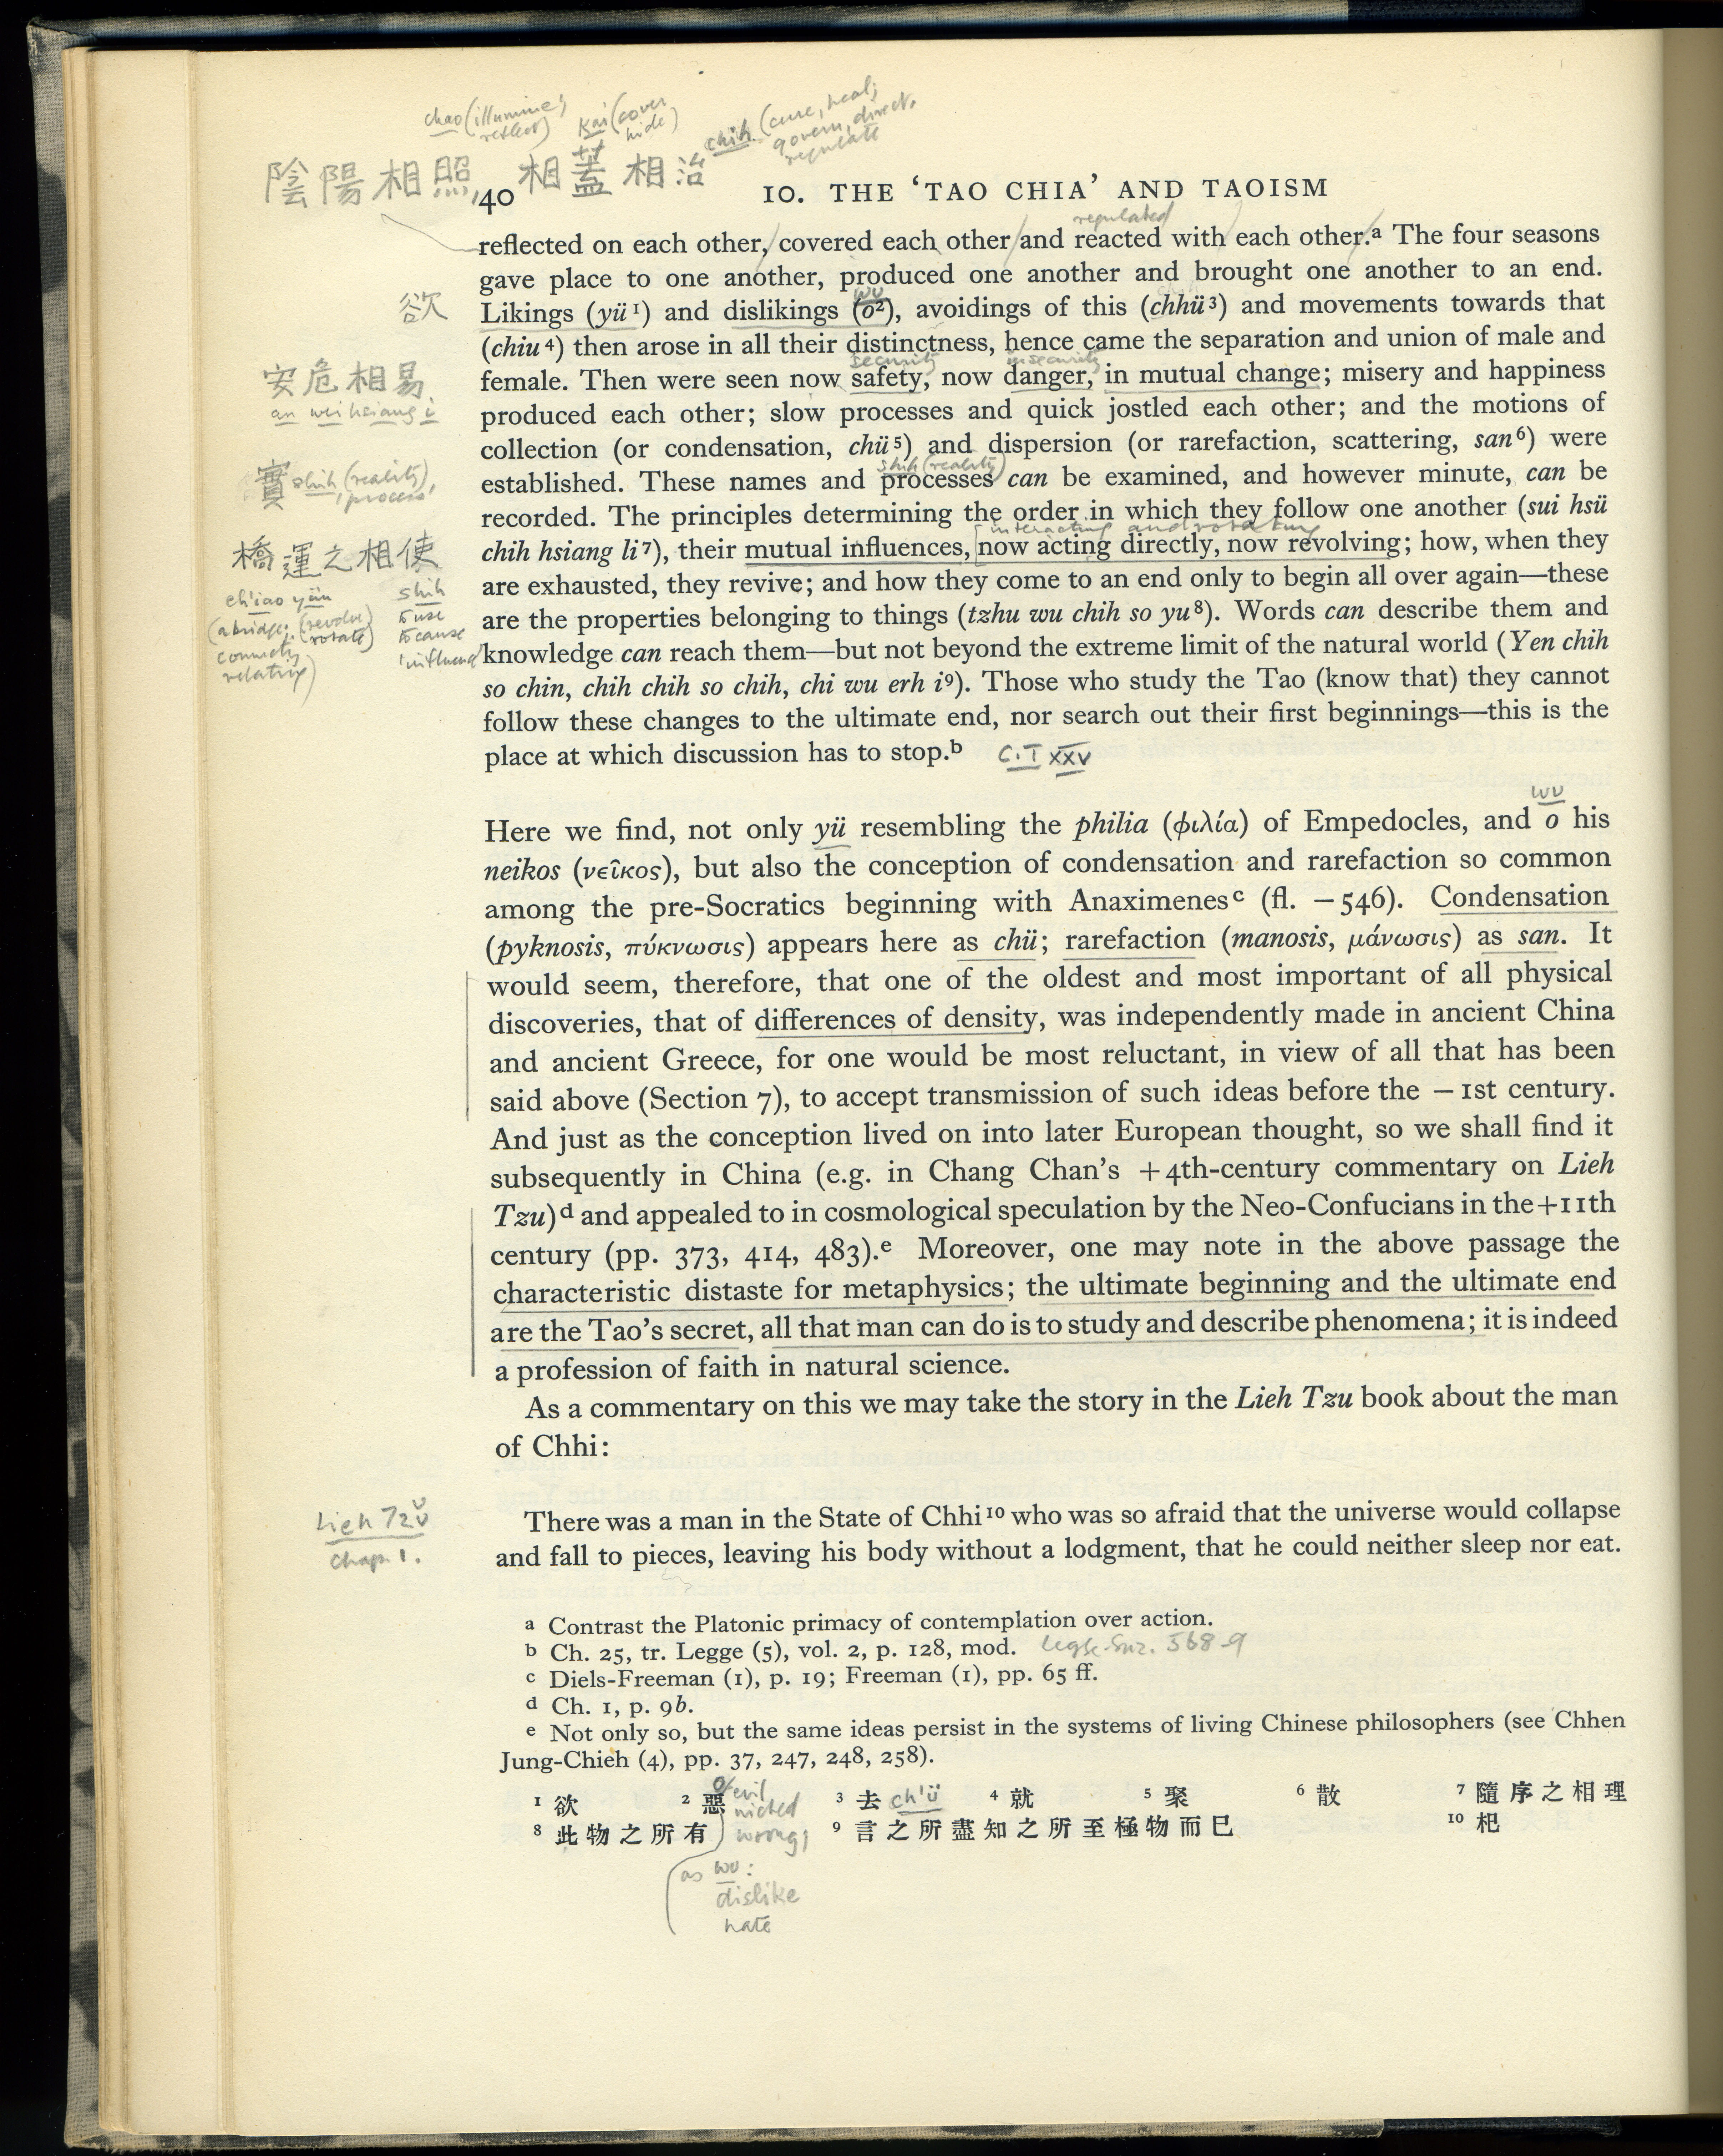 Annotations from Mai-mai Sze’s copy of Science and Civilisation in China, volume 2.